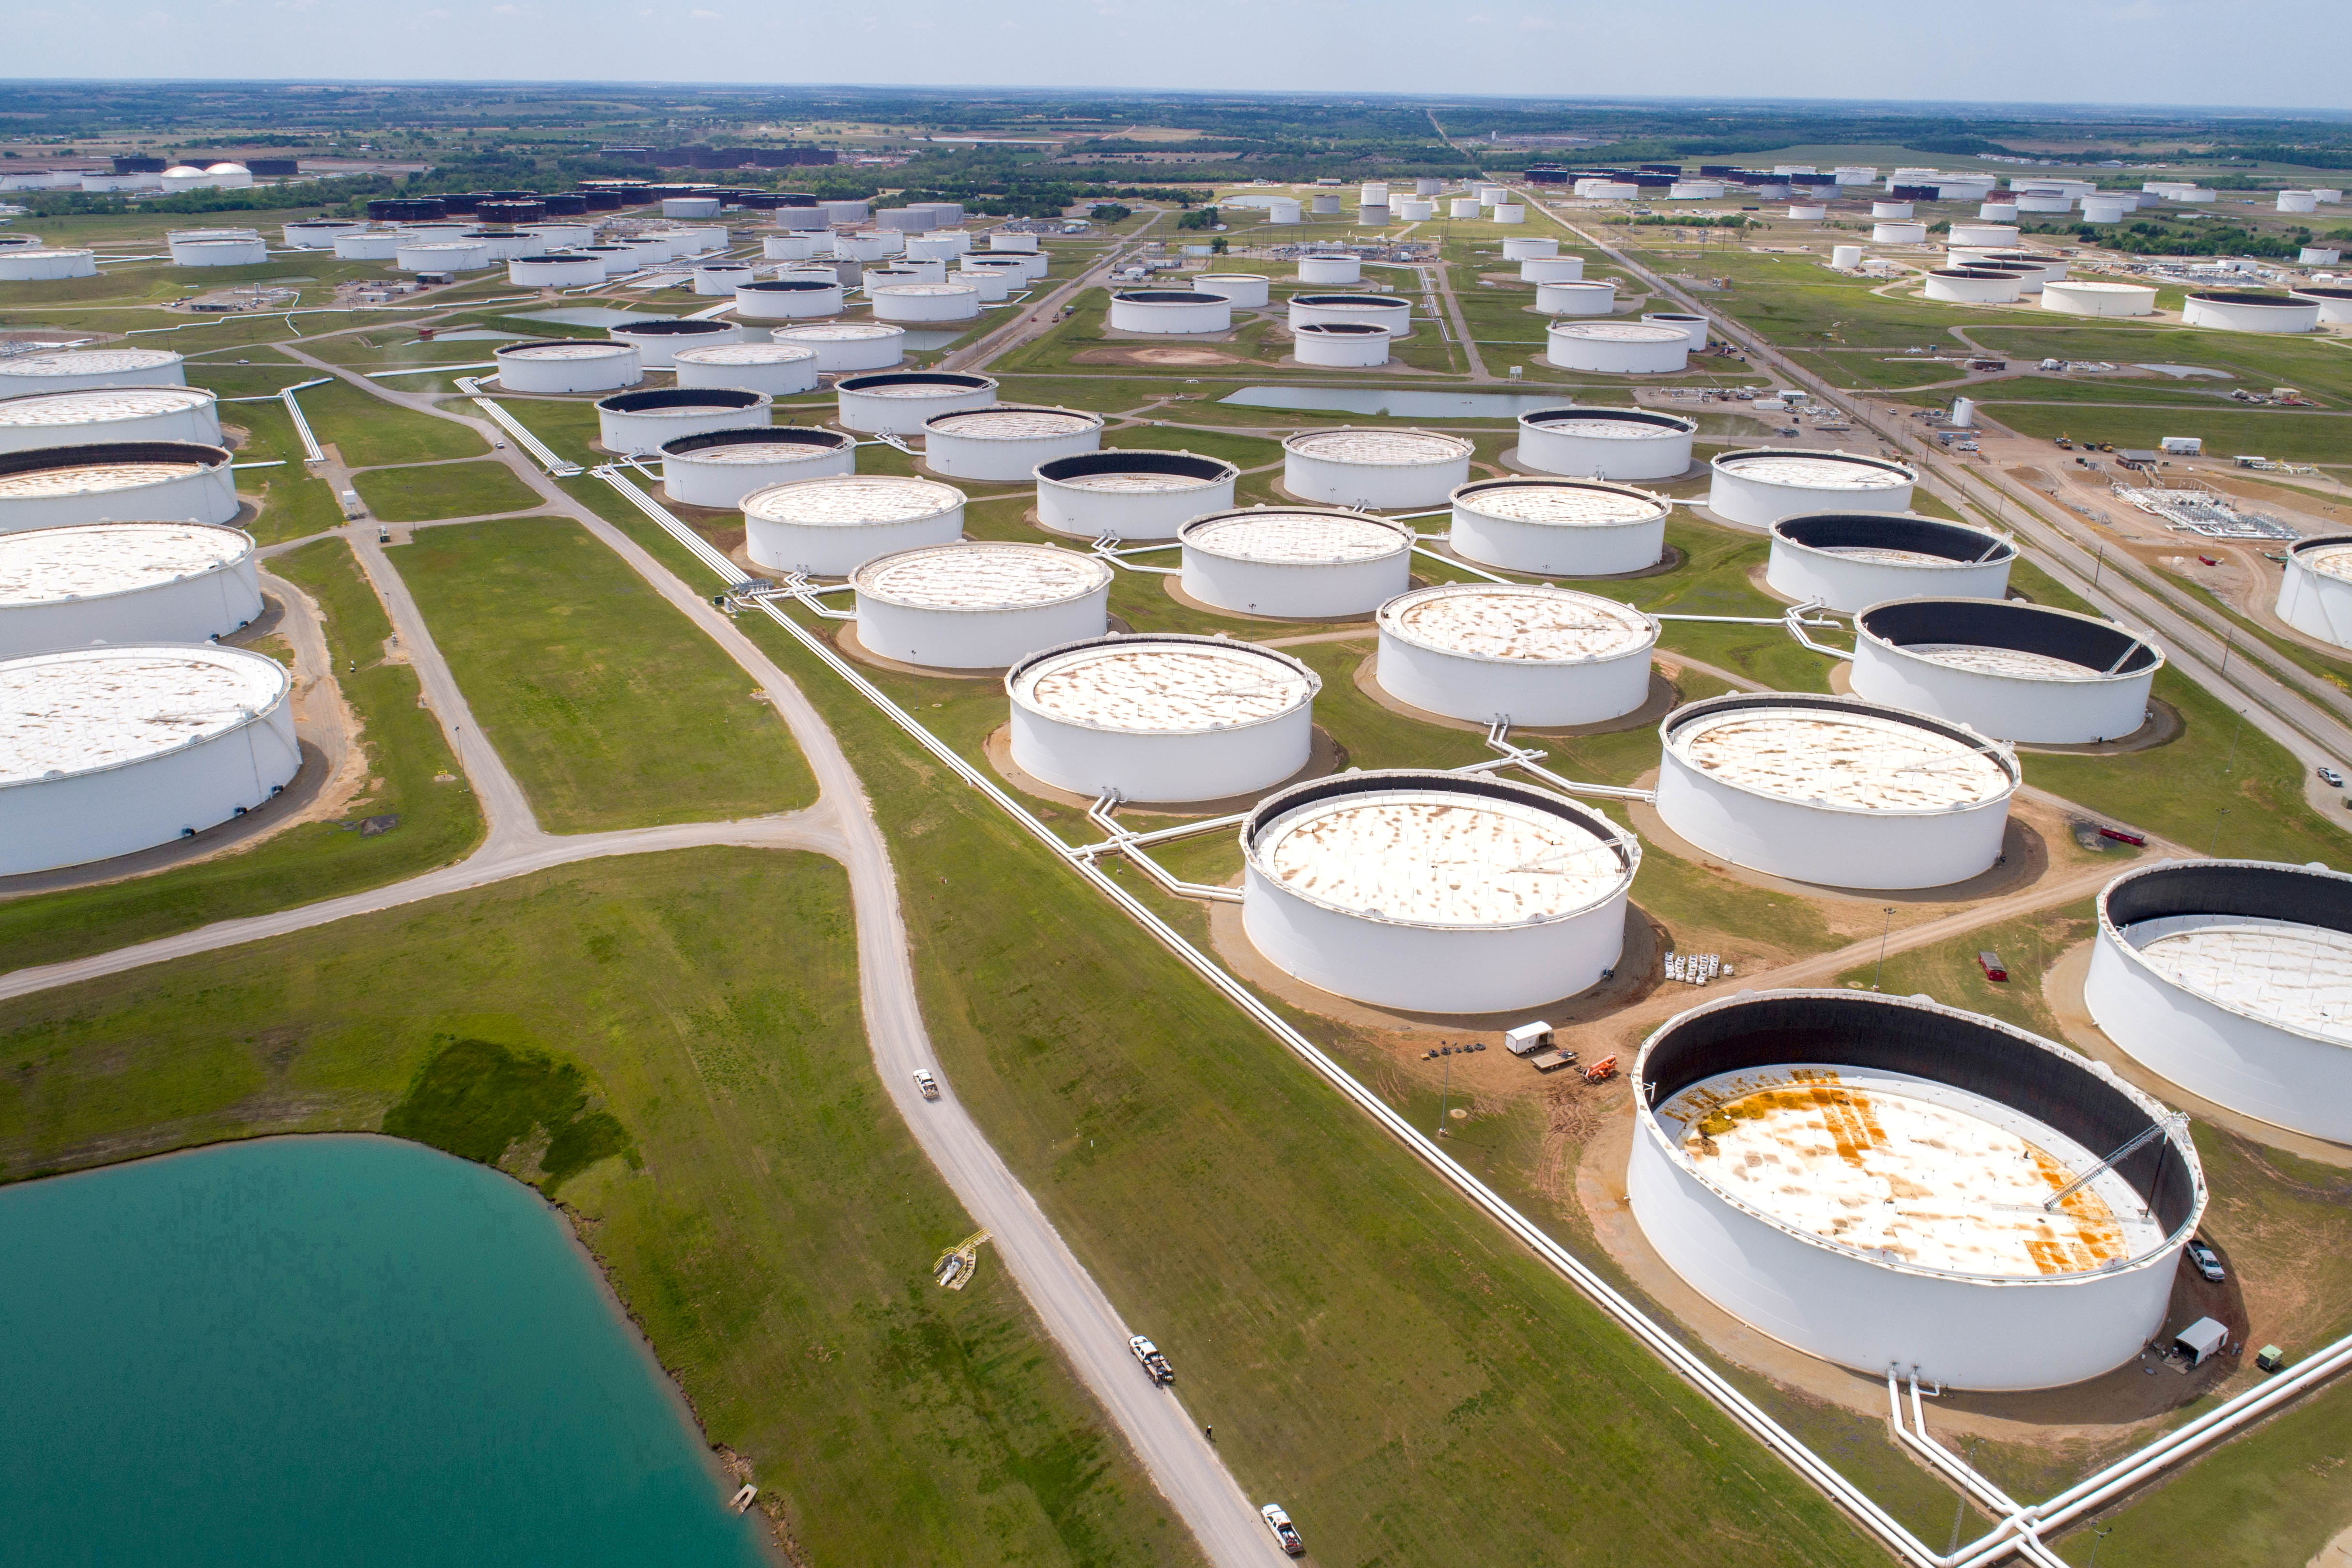 Crude oil storage tanks are seen in an aerial photograph at the Cushing oil hub in Cushing, Oklahoma, U.S. April 21, 2020. REUTERS/Drone Base/File Photo